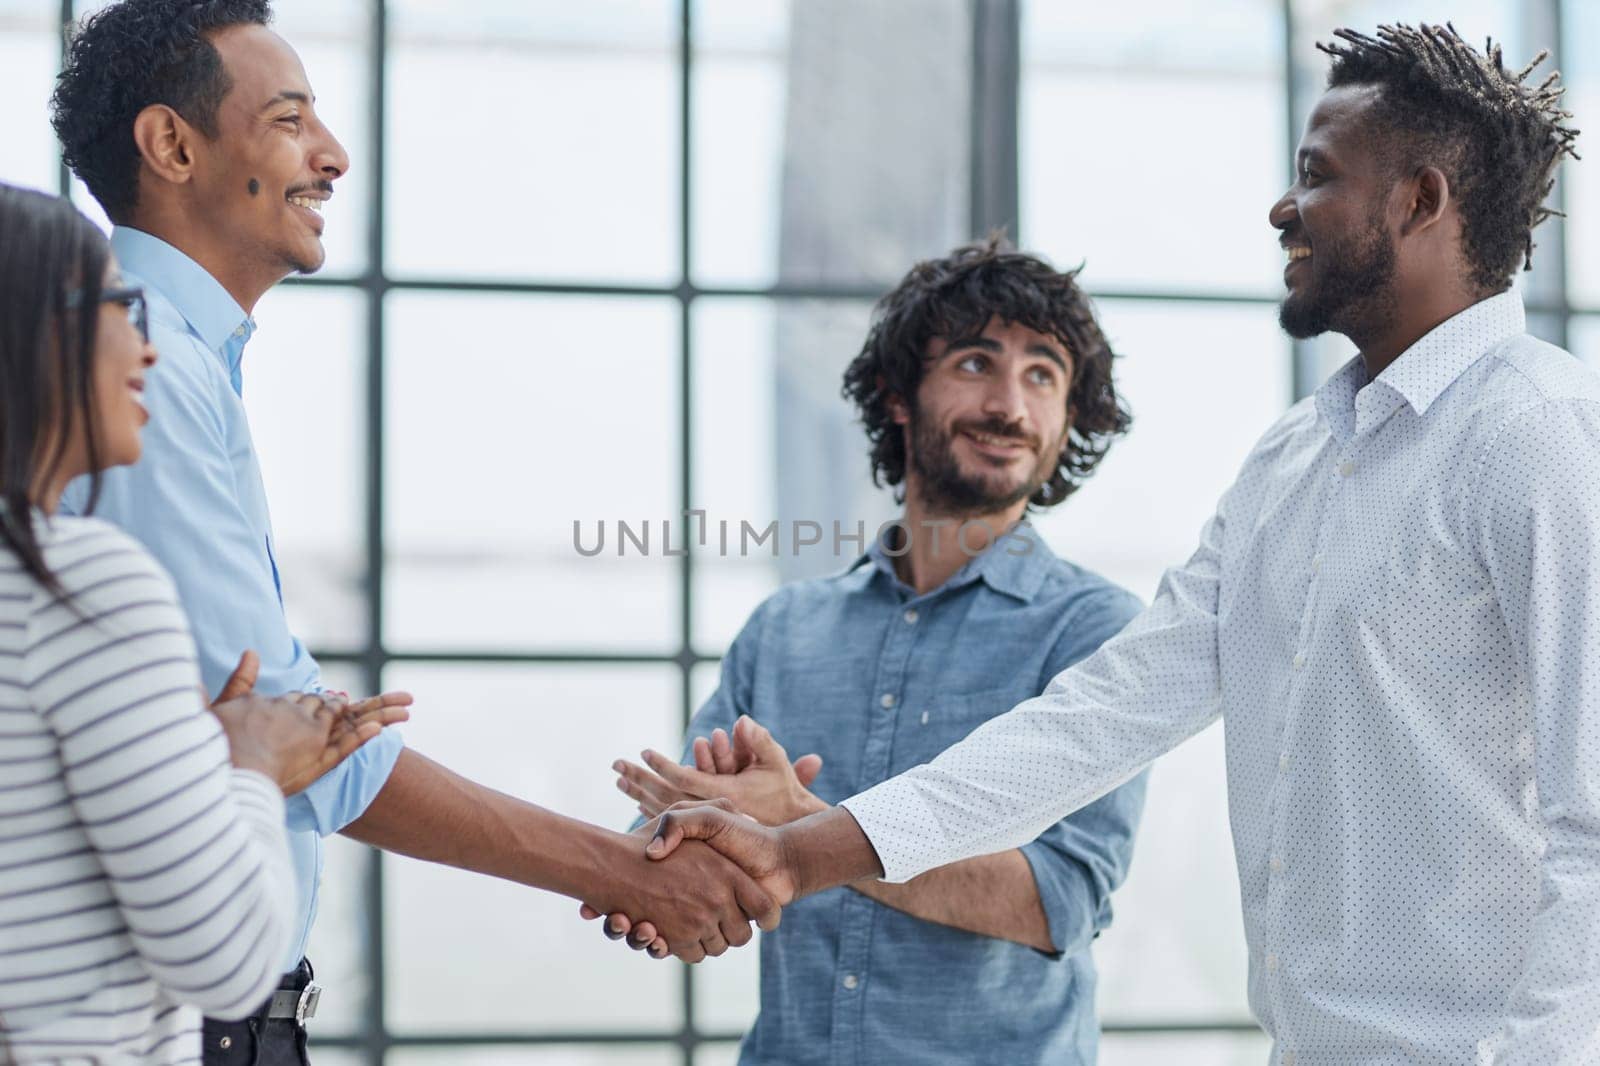 Successful Business Collaboration: Executives Greet with Handshake in Office by Prosto